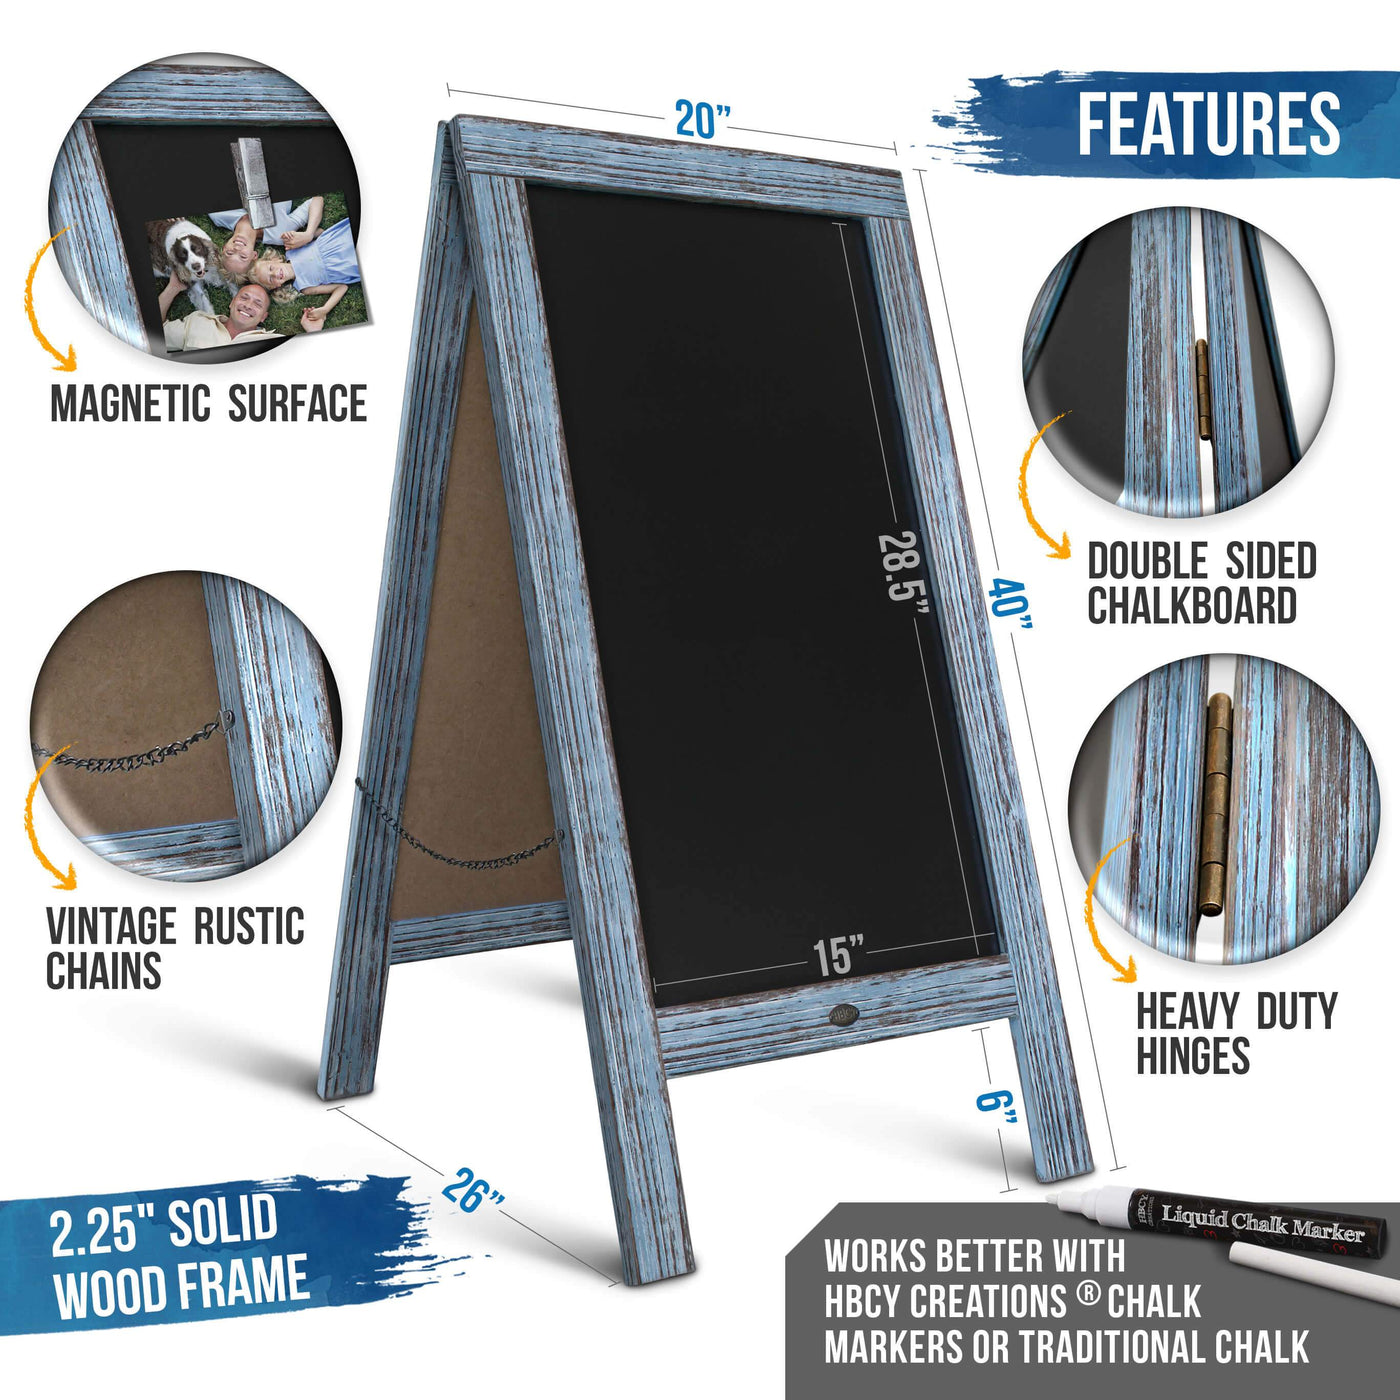 HBCY Creations Whitewashed Magnetic A-Frame Chalkboard Deluxe Set